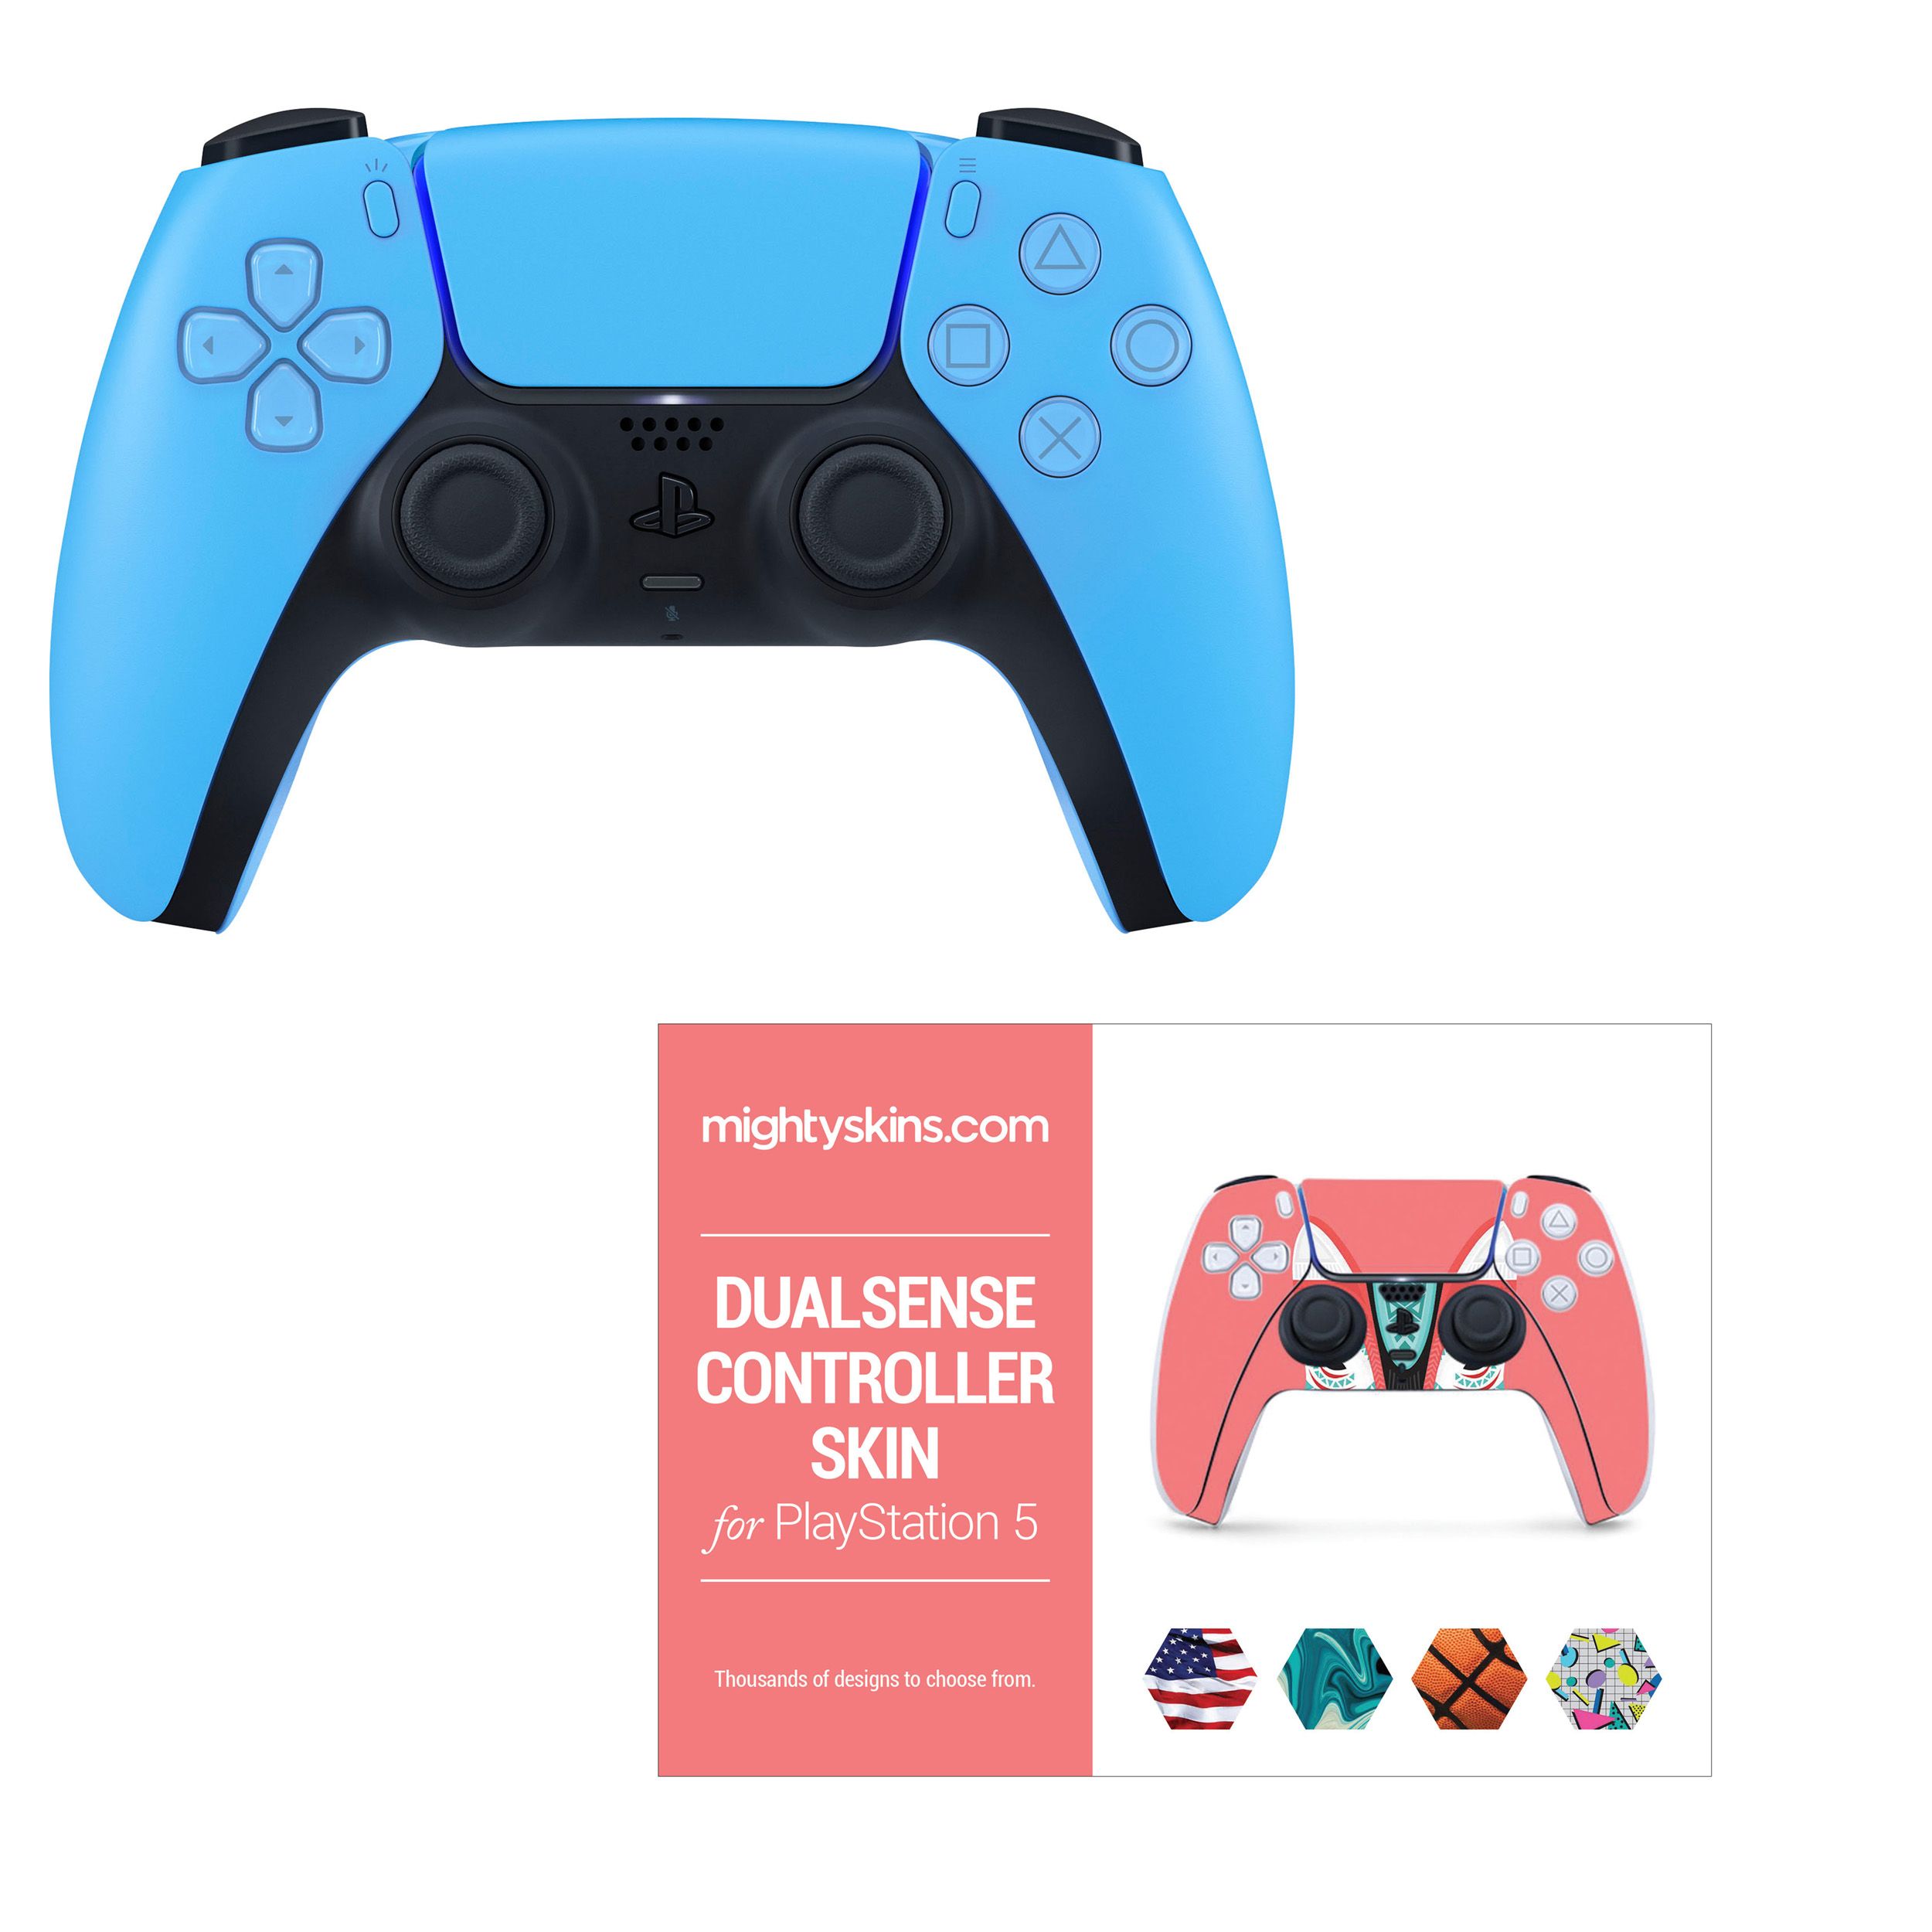 DualSense wireless controller, The innovative new controller for PS5